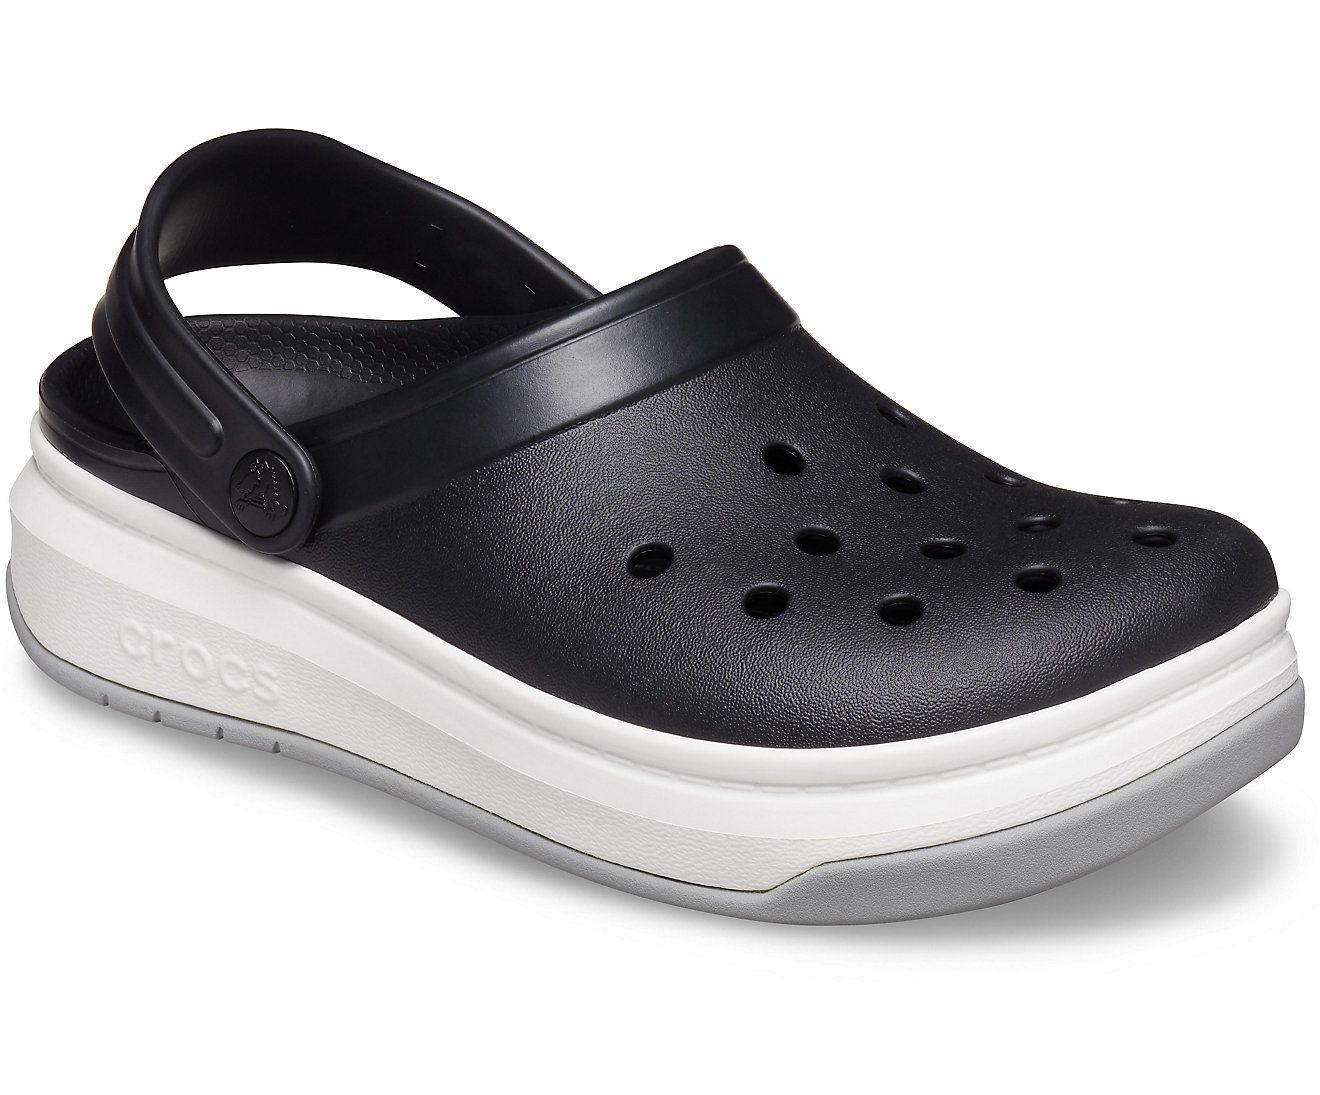 Authentic Crocband Full Force Clog - Black White | mStore | mTravel ...